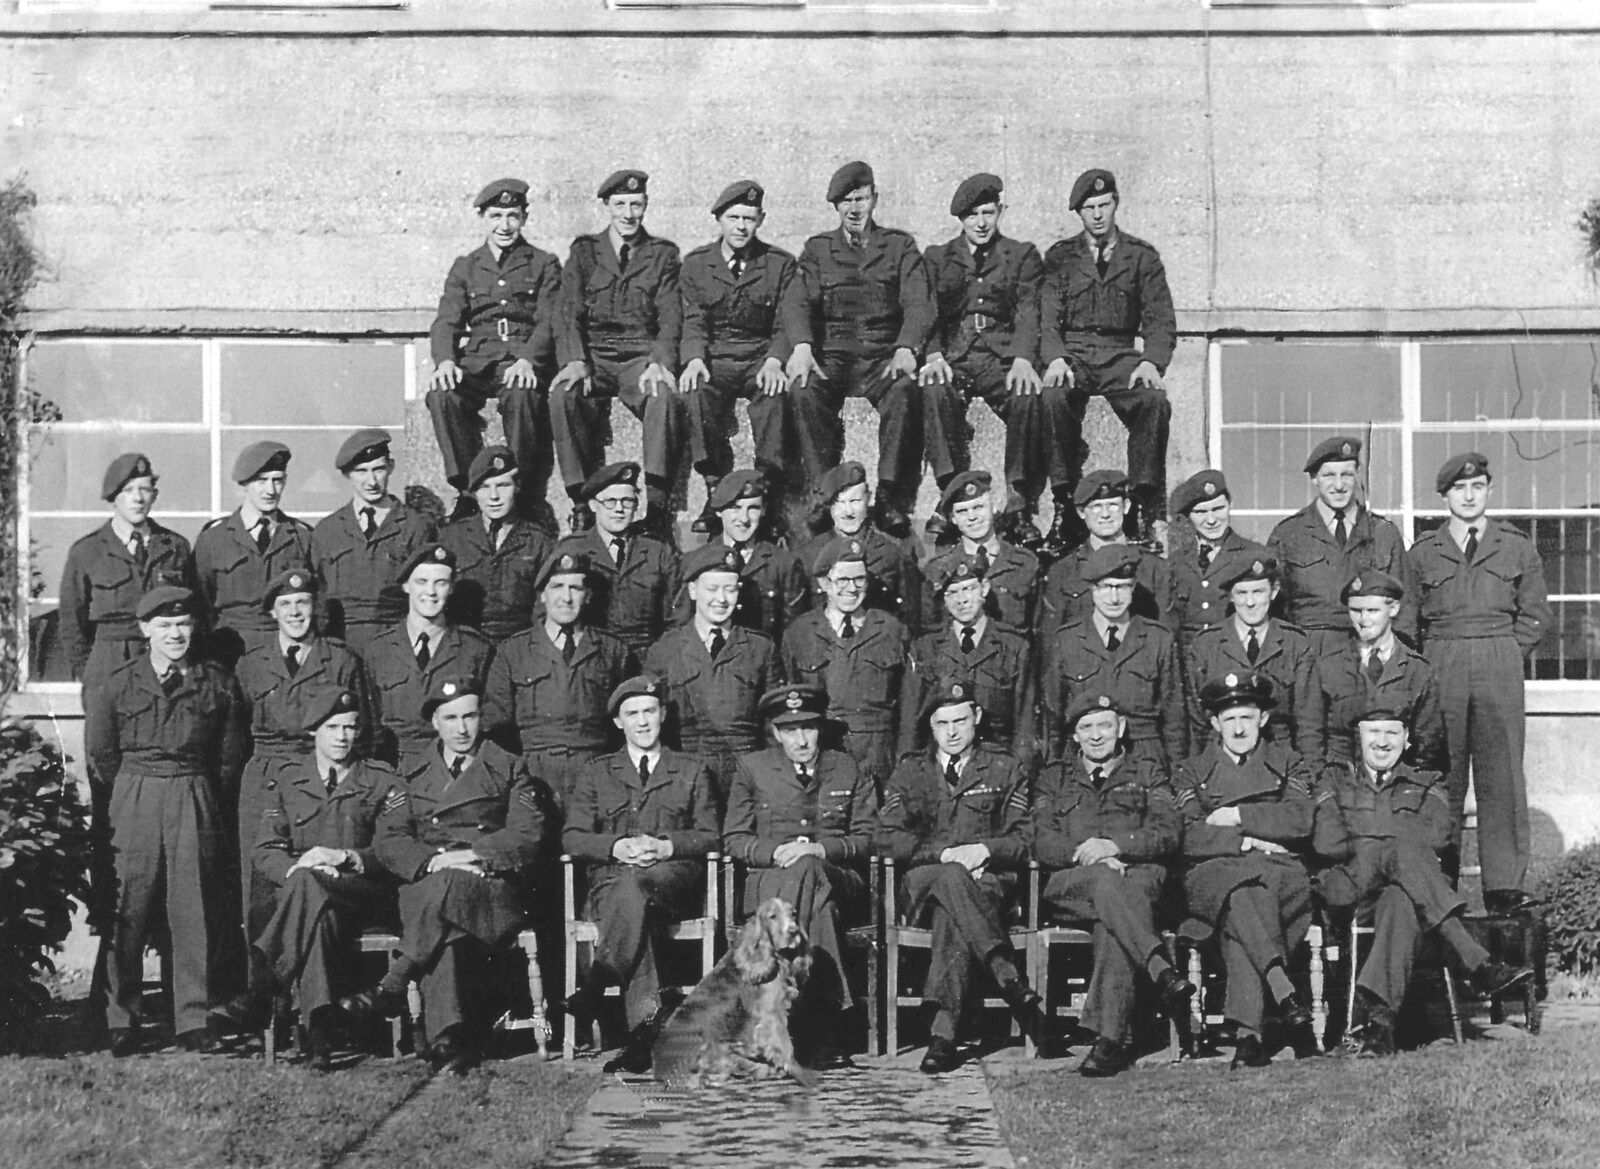 The Grandad Archive, Various Locations - 7th January 2023: 3 Wing Armourers at RAF Halton, 1951